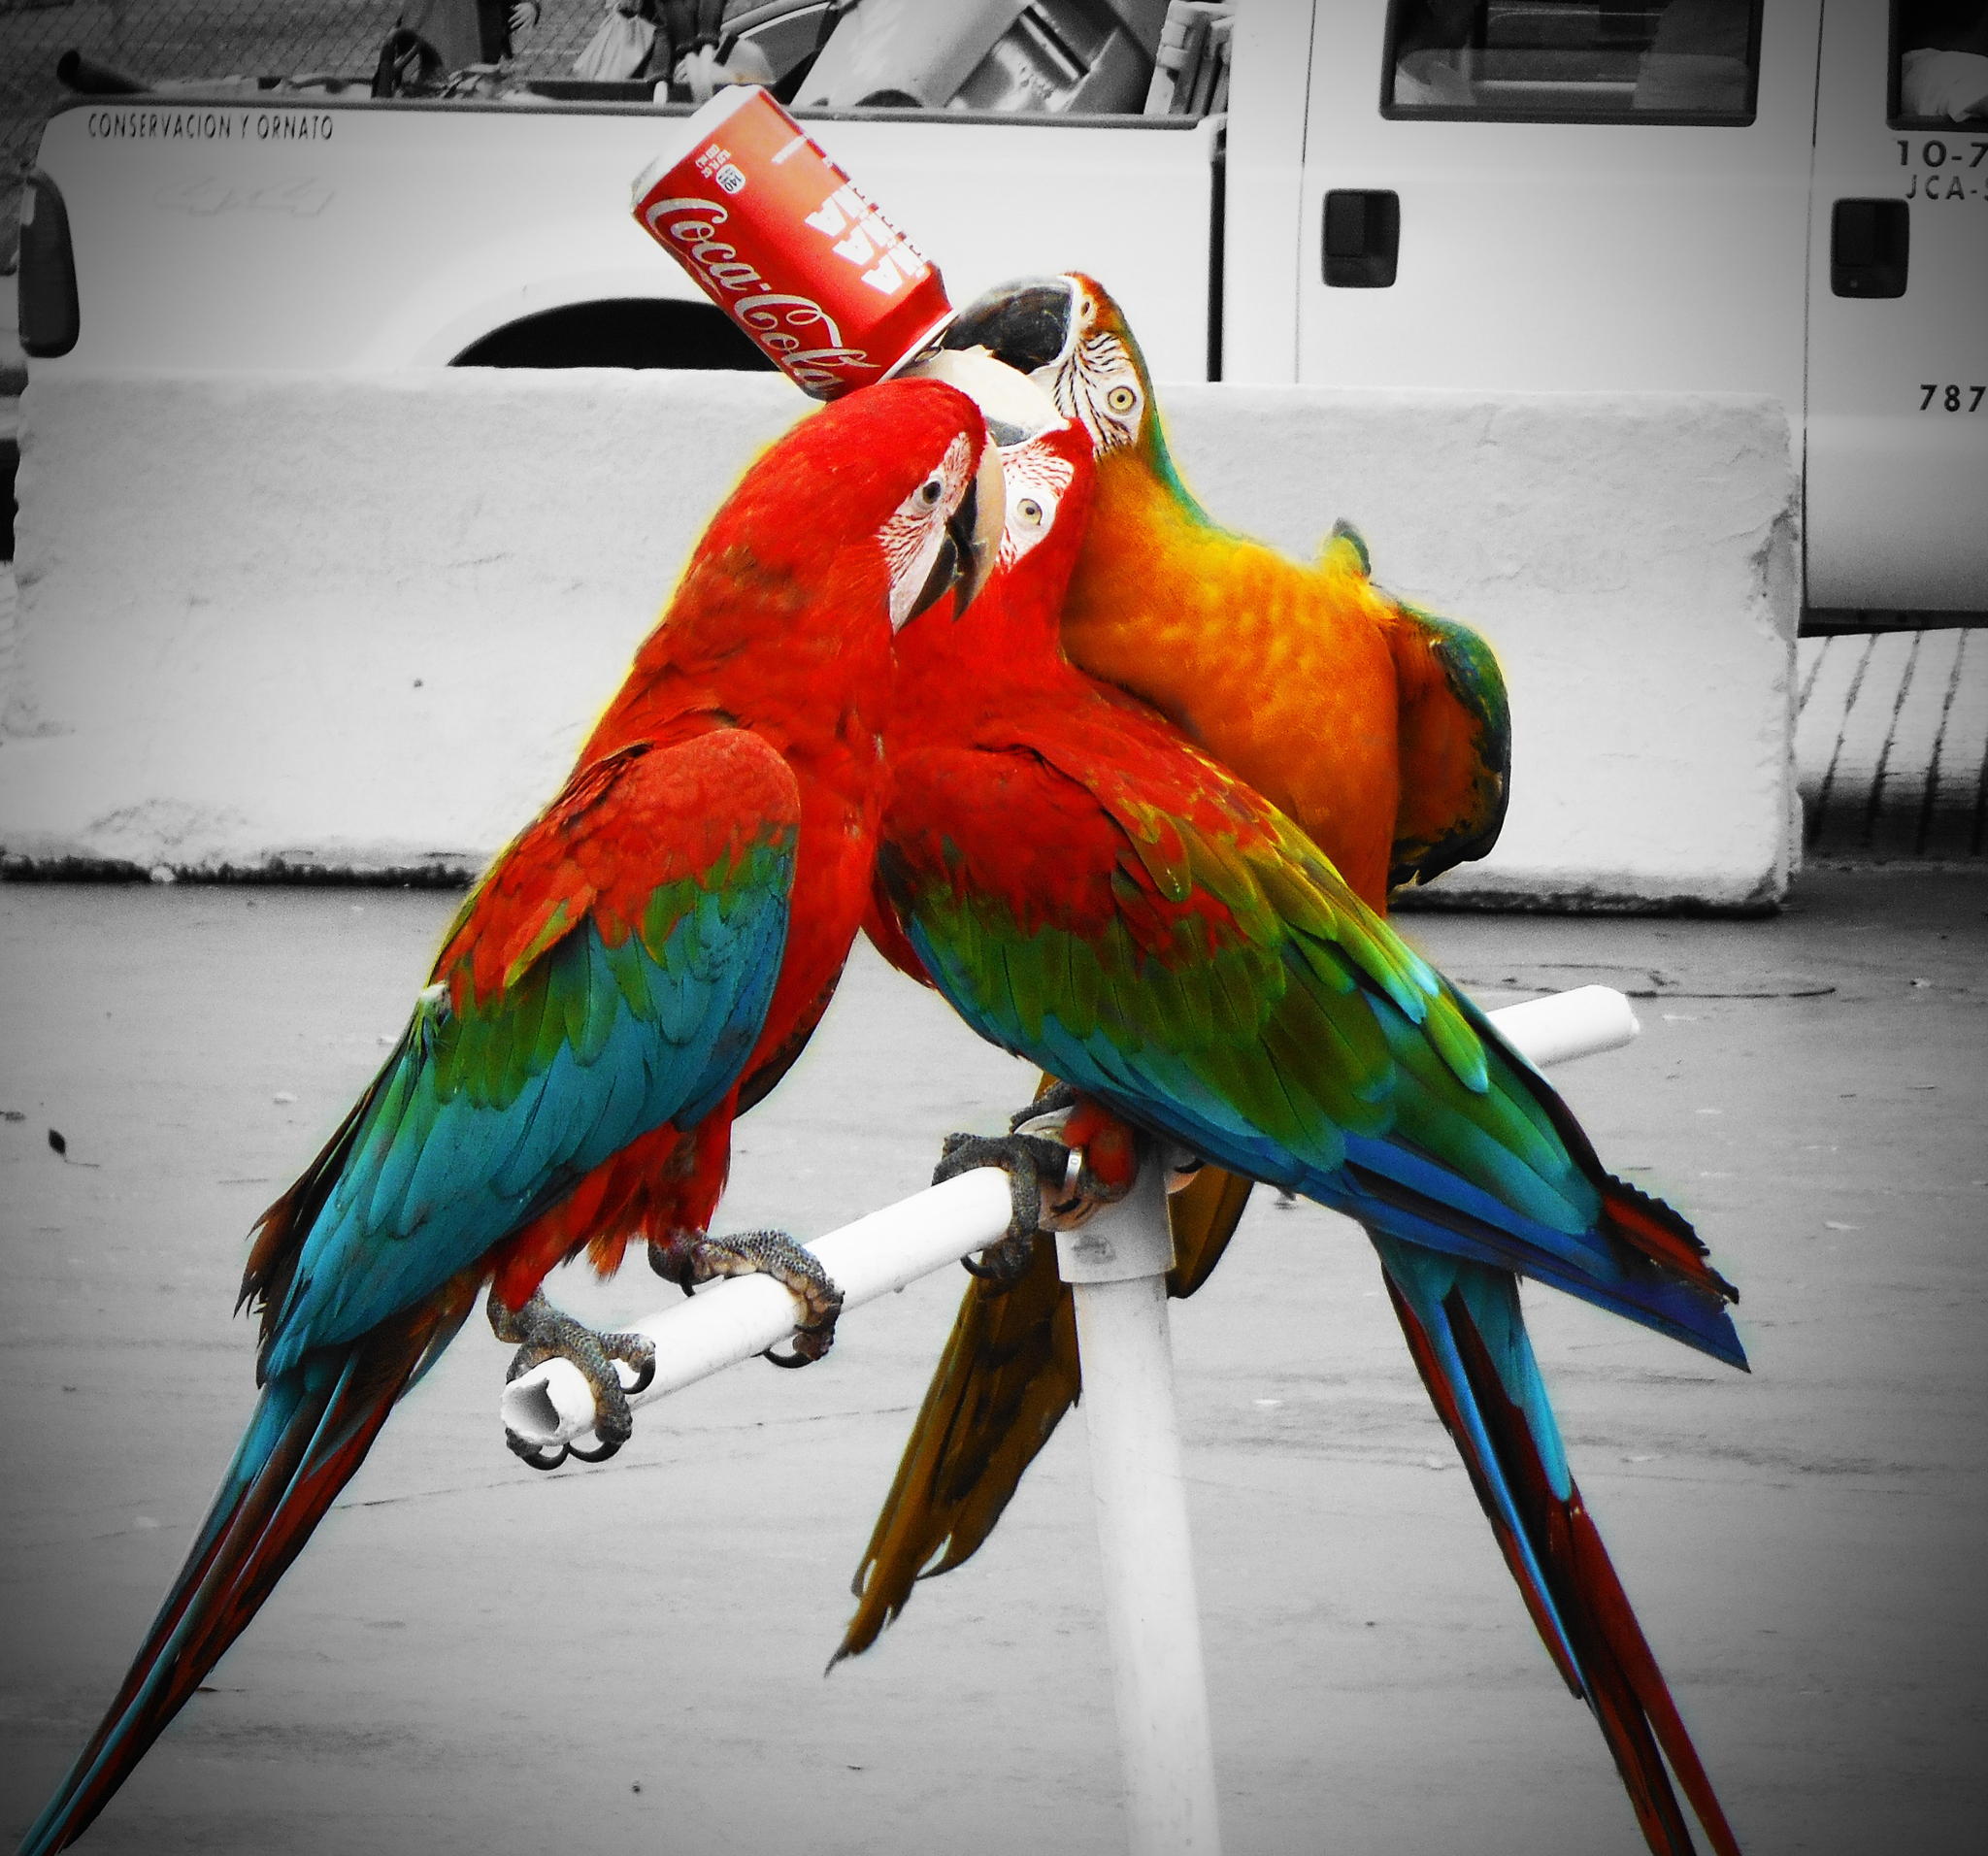 San Jaun Puerto Rico Parrots sharing a can of Coca Cola by Kendra Collins